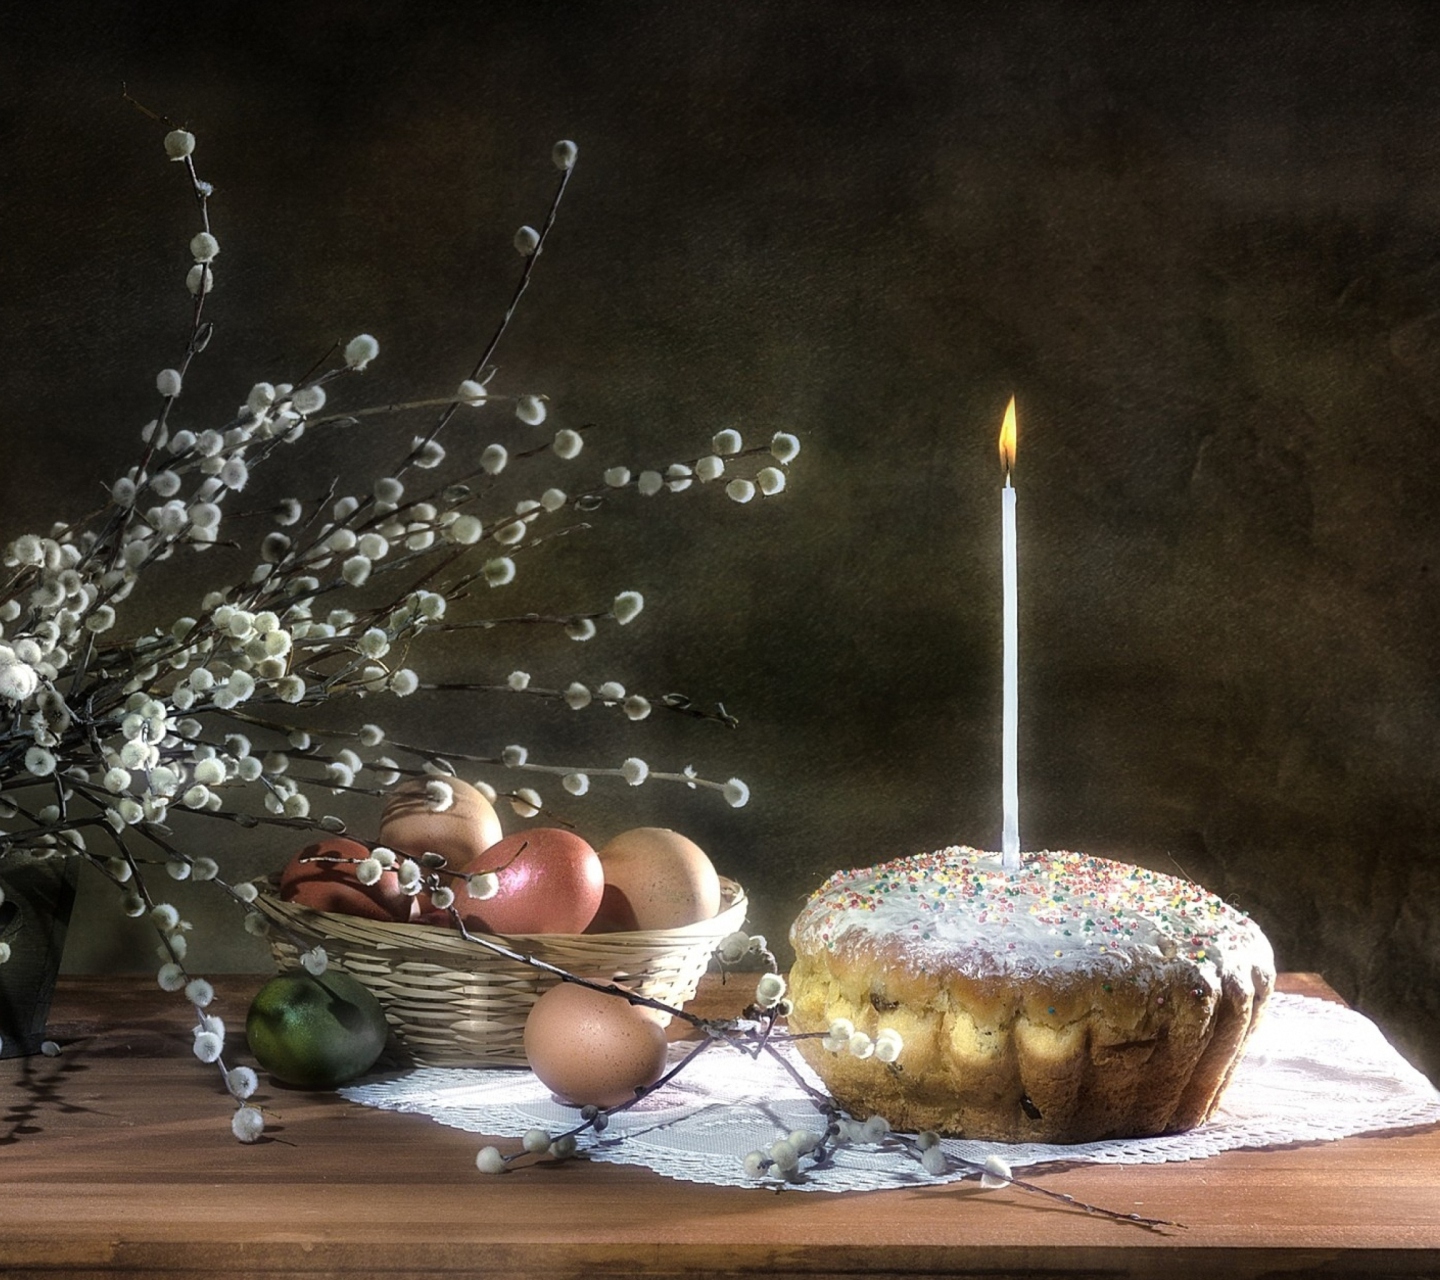 Easter Cake With Candle screenshot #1 1440x1280